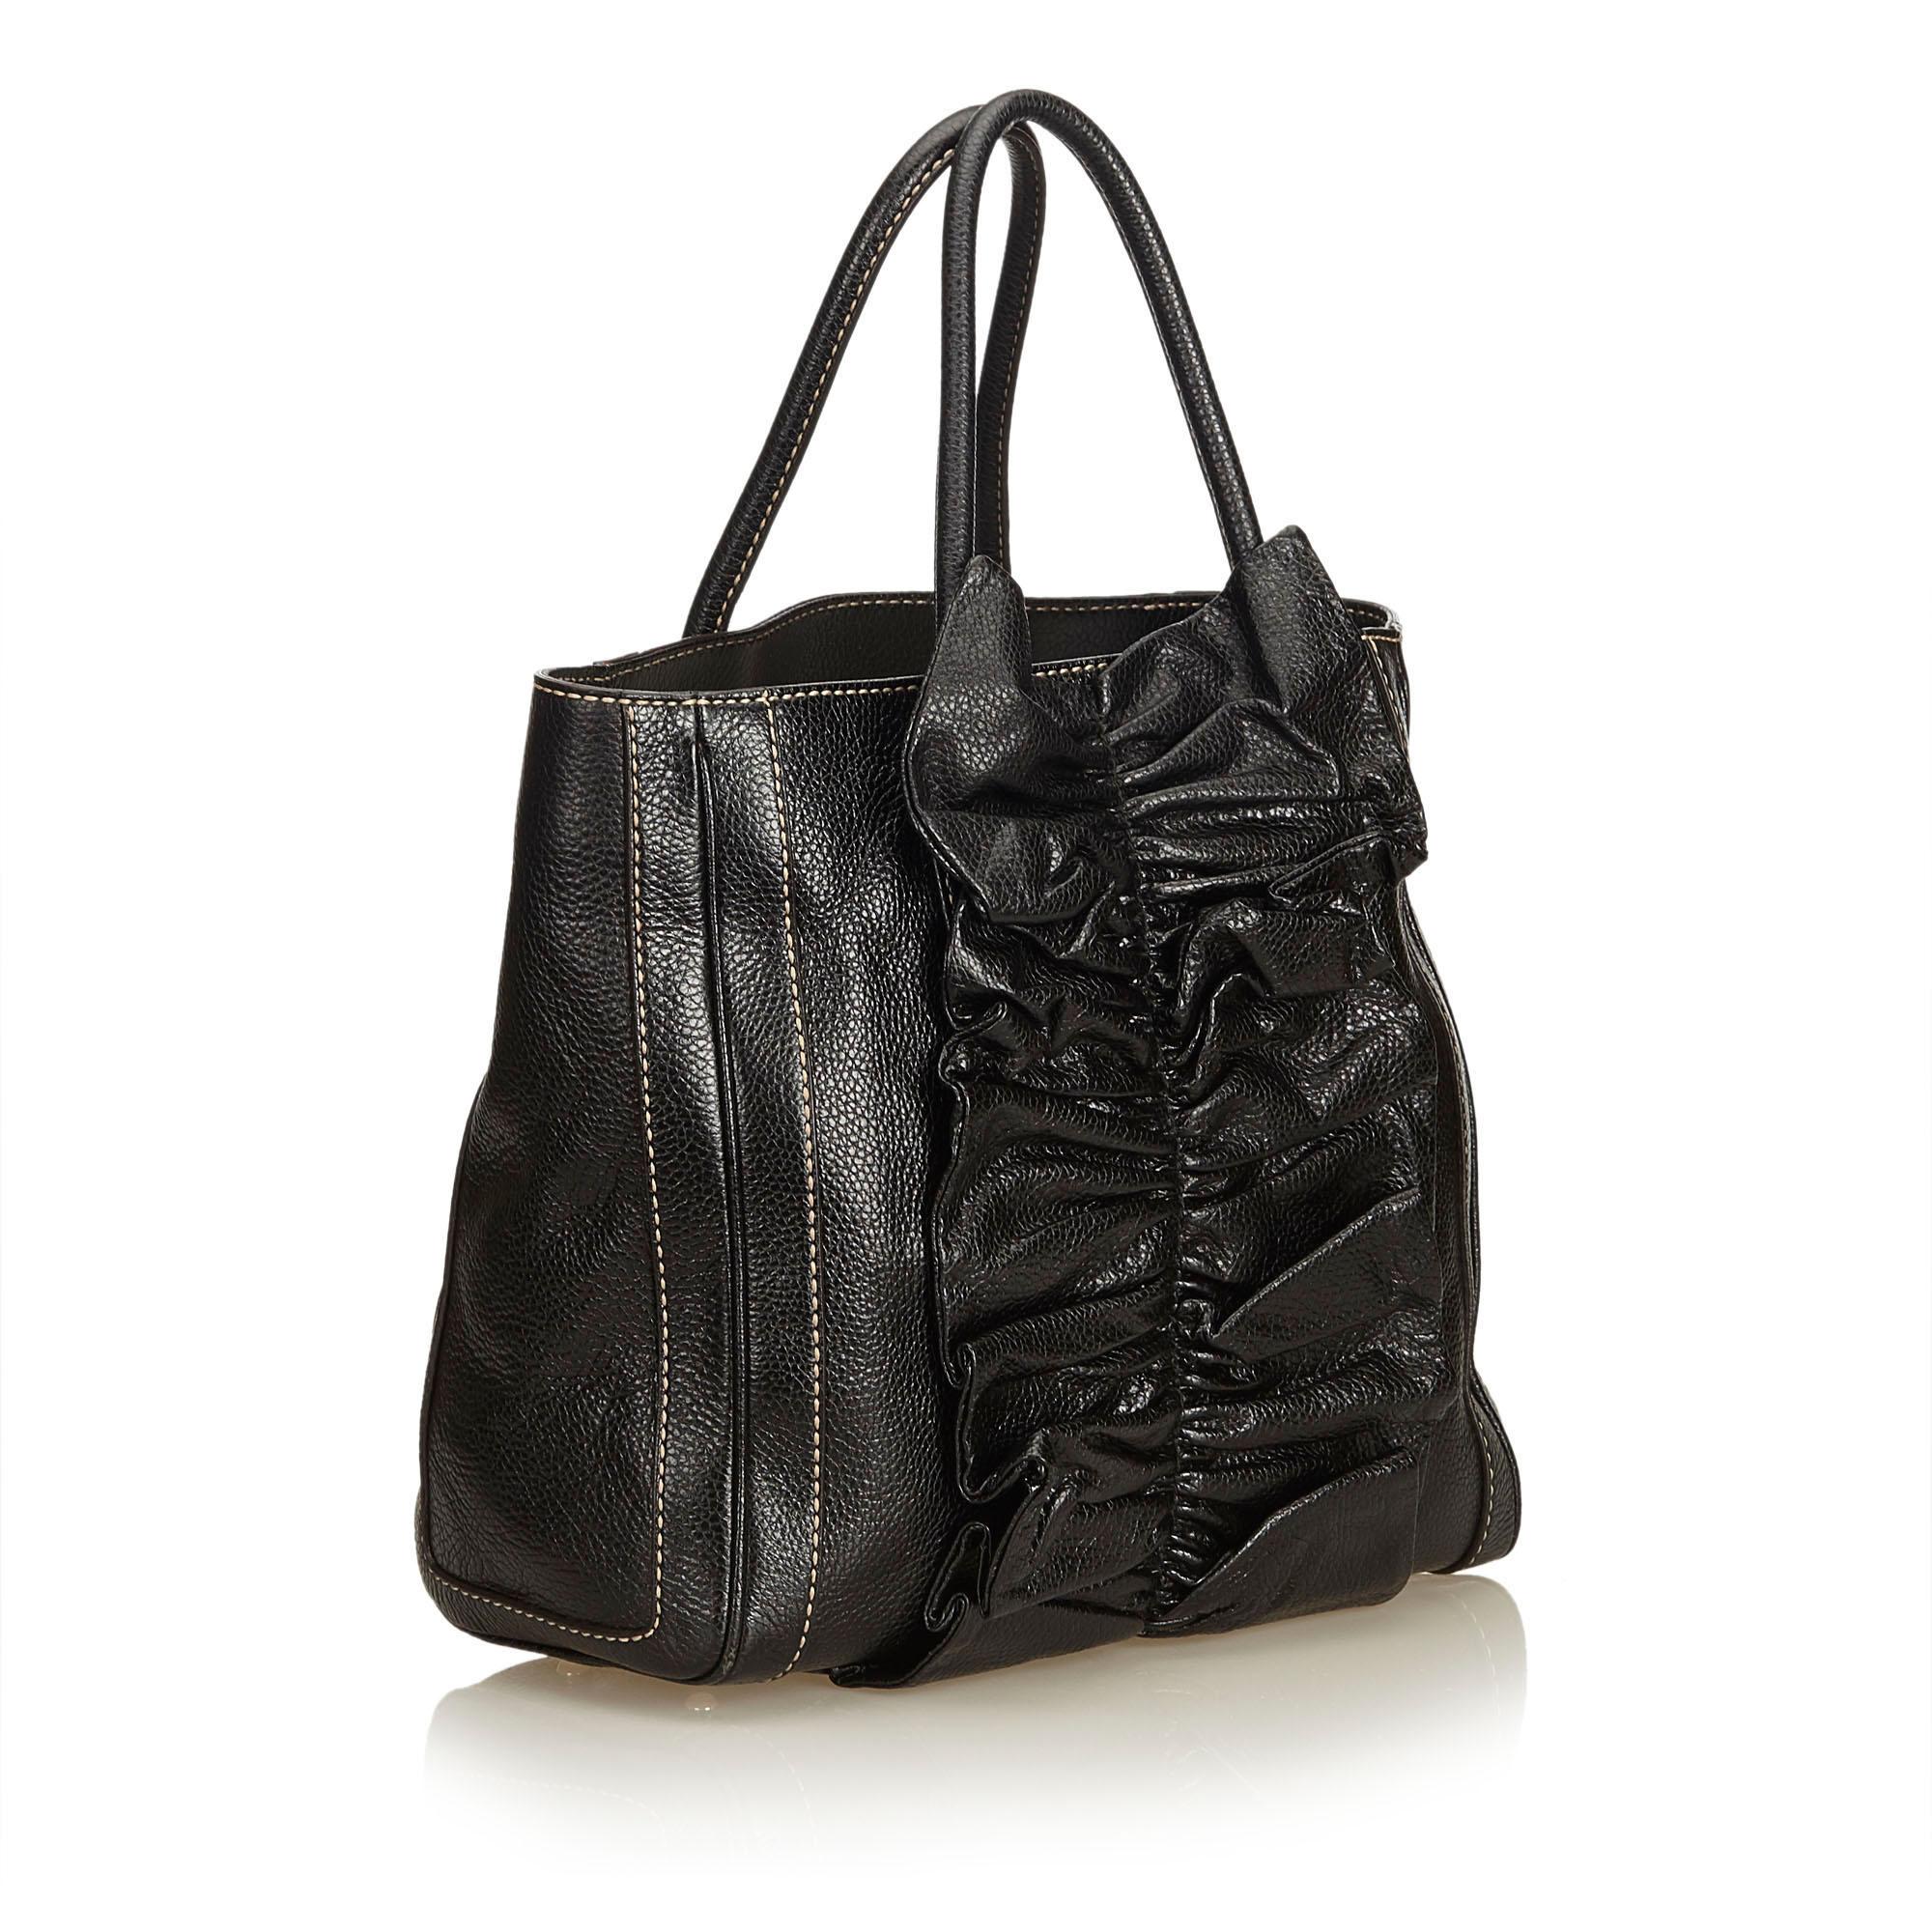 This tote bag features a leather body with ruffled leather detail, rolled leather handles, open top, and interior zip pocket. It carries as AB condition rating.

Inclusions: 
Dust Bag
Authenticity Card

Dimensions:
Length: 29.50 cm
Width: 34.50